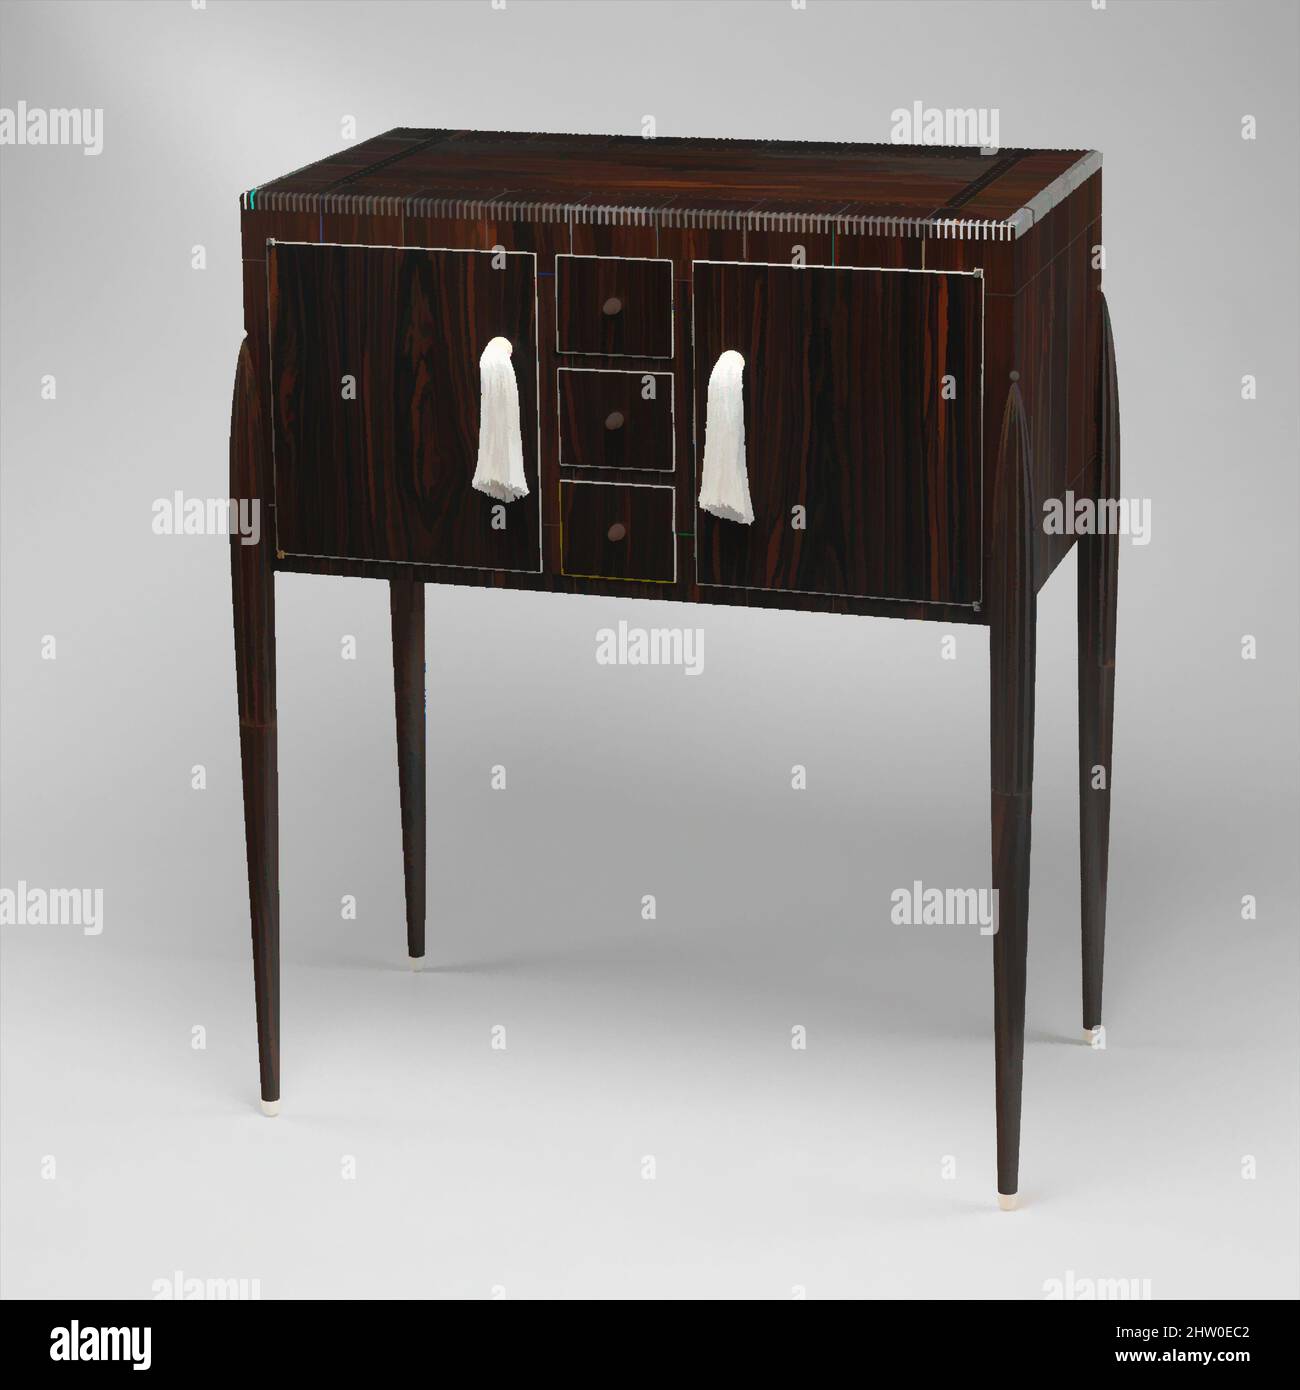 Art inspired by Fuseaux' Cabinet, ca. 1925, Macassar ebony, ivory, silk, silvered bronze, H. 39 1/2, W. 33 1/2, D. 19 1/4 in. (100.3 x 85.1 x 48.9 cm), Furniture, The formal simplicity of this cabinet provides a backdrop for an extraordinarily complex and subtle marquetry pattern. The, Classic works modernized by Artotop with a splash of modernity. Shapes, color and value, eye-catching visual impact on art. Emotions through freedom of artworks in a contemporary way. A timeless message pursuing a wildly creative new direction. Artists turning to the digital medium and creating the Artotop NFT Stock Photo